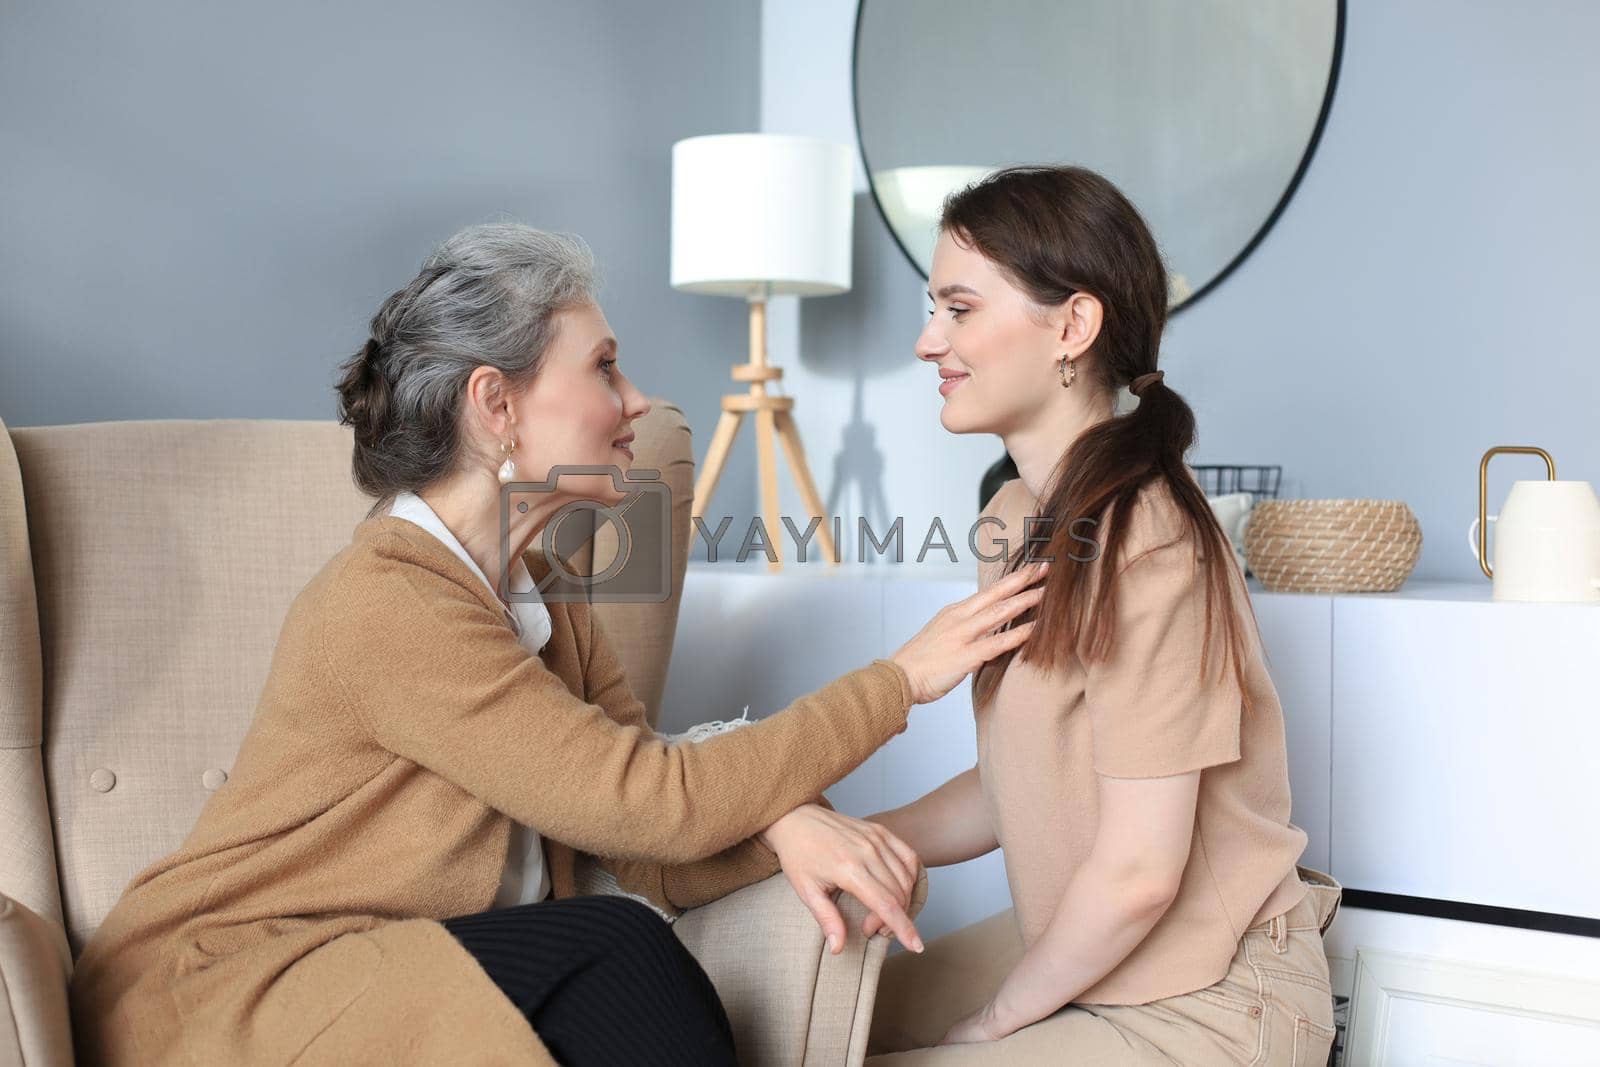 Royalty free image of Happy elderly middle mother sitting on chair touching a strand of daughter's hair, looking each other, trusted relations. Family concept. by tsyhun